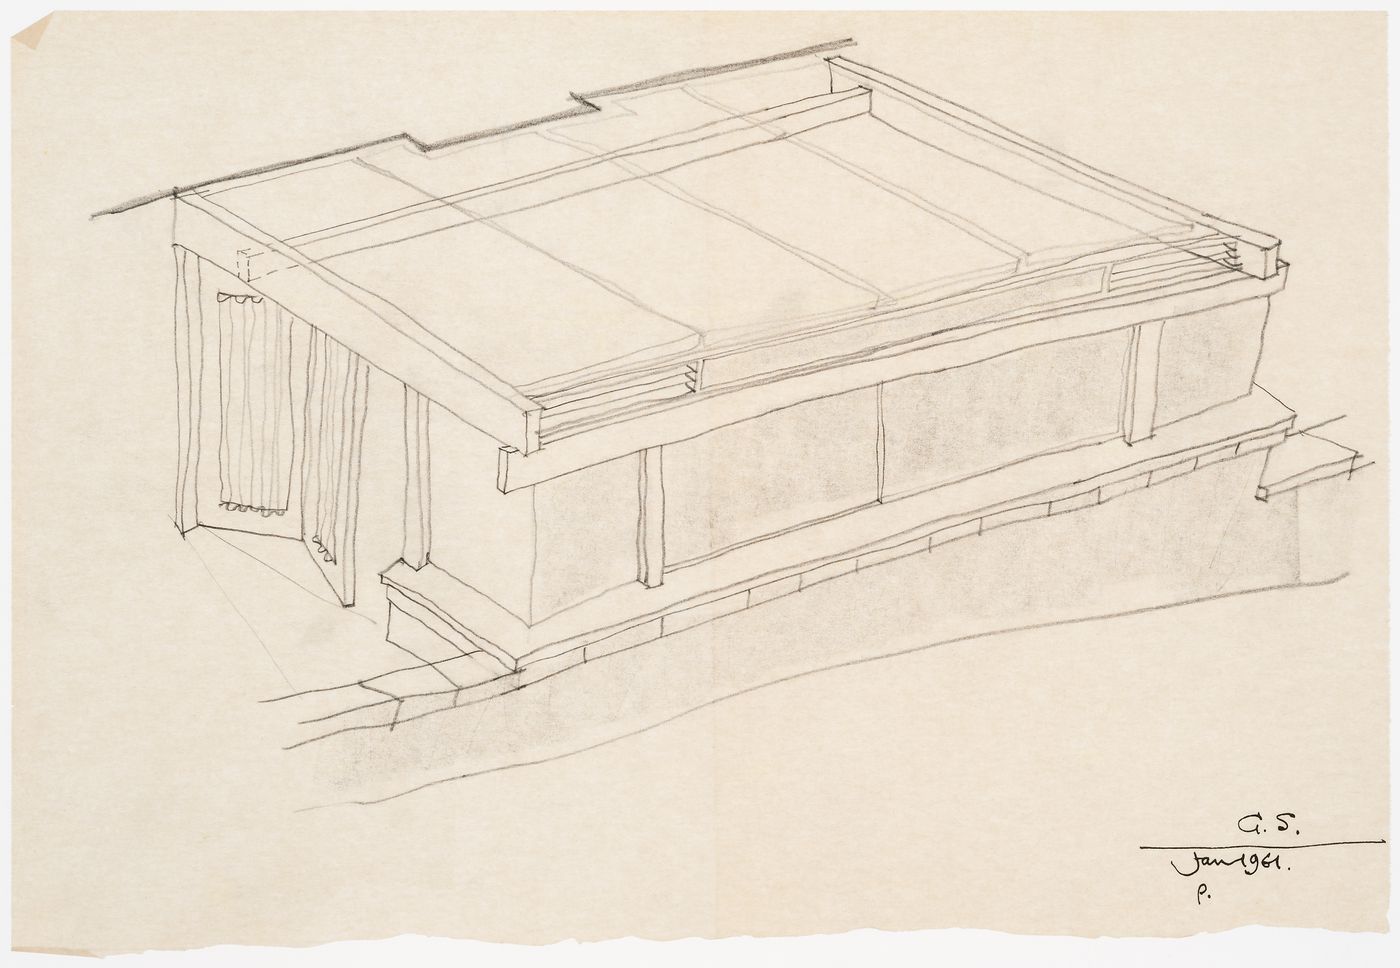 Perspective sketch for a sun house addition to Craigmoor, Delph, Oldham, England